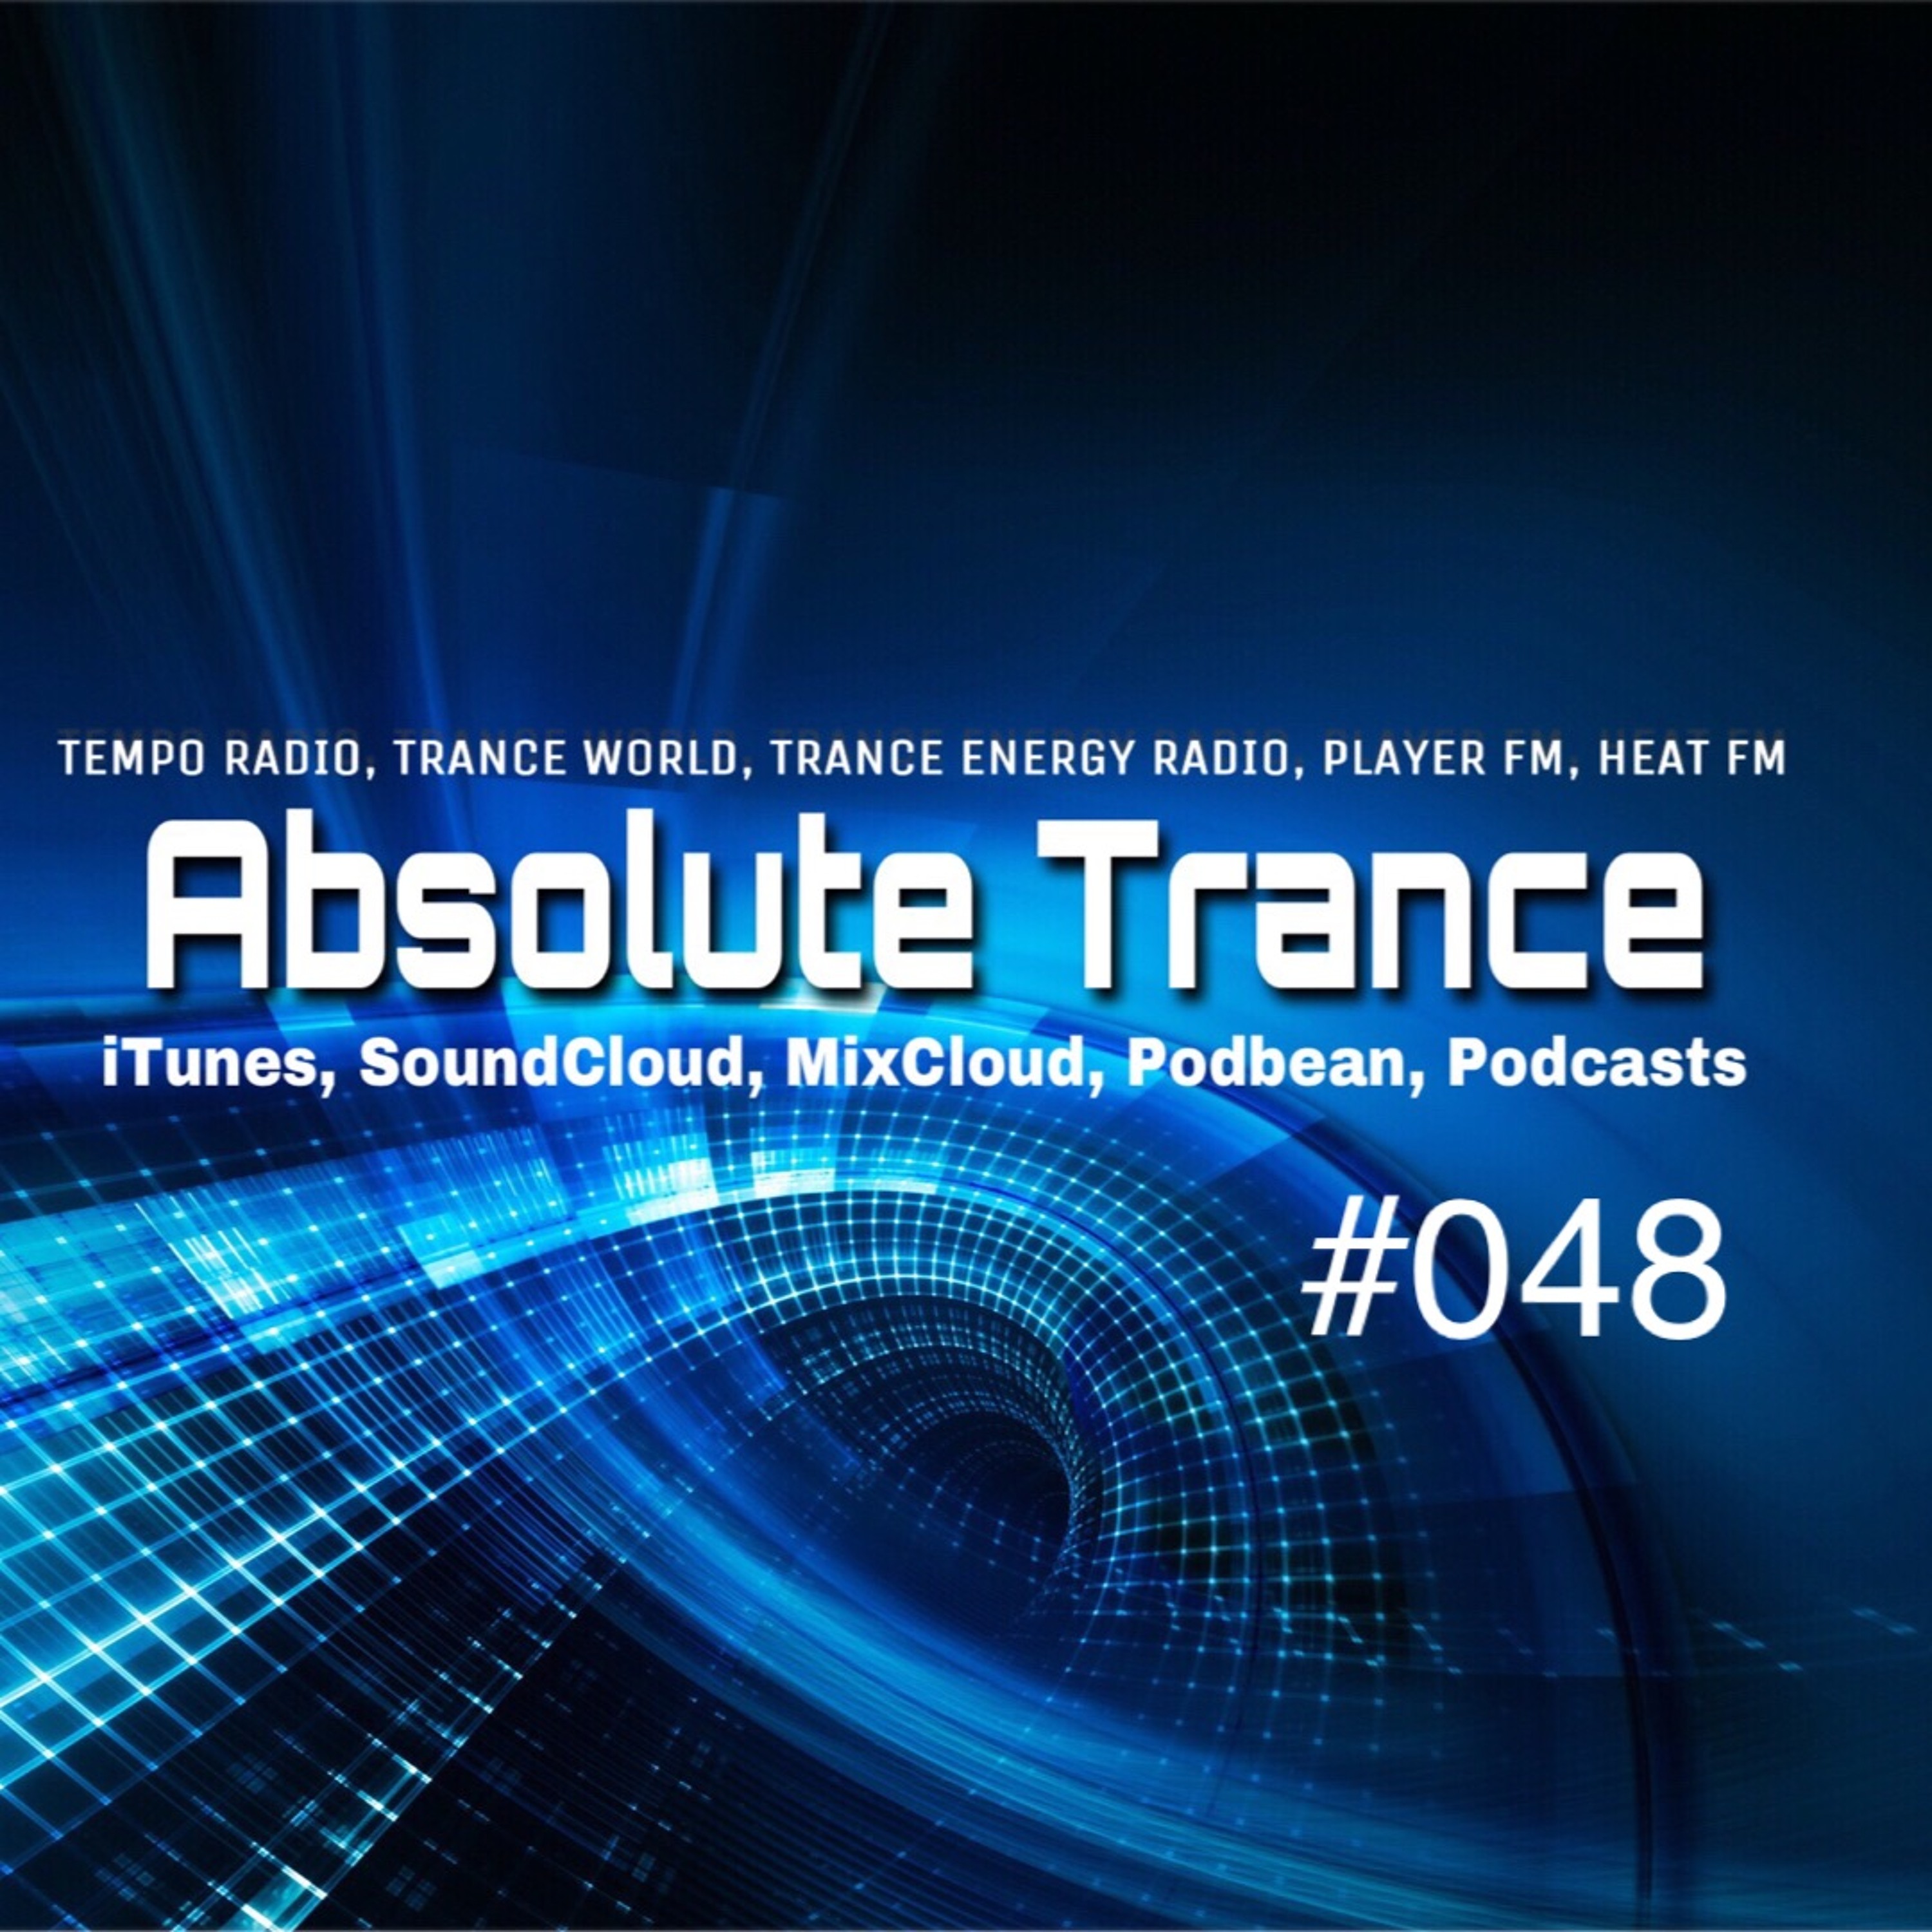 Absolute Trance #048